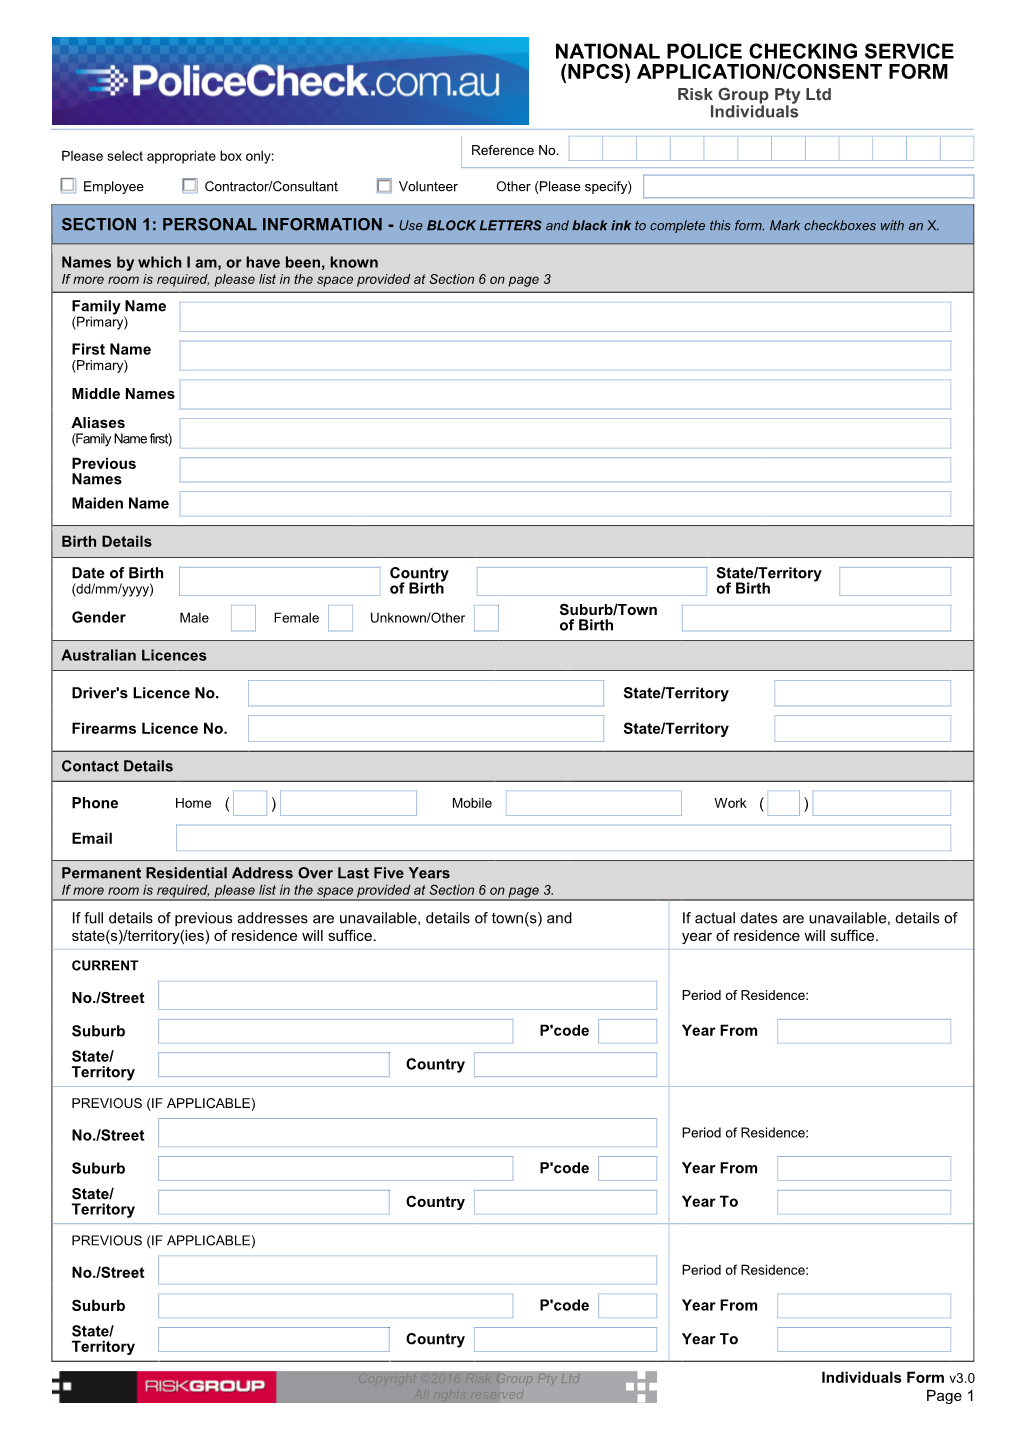 NATIONAL POLICE CHECKING SERVICE (NPCS) APPLICATION/CONSENT FORM Risk Group Pty Ltd Individuals